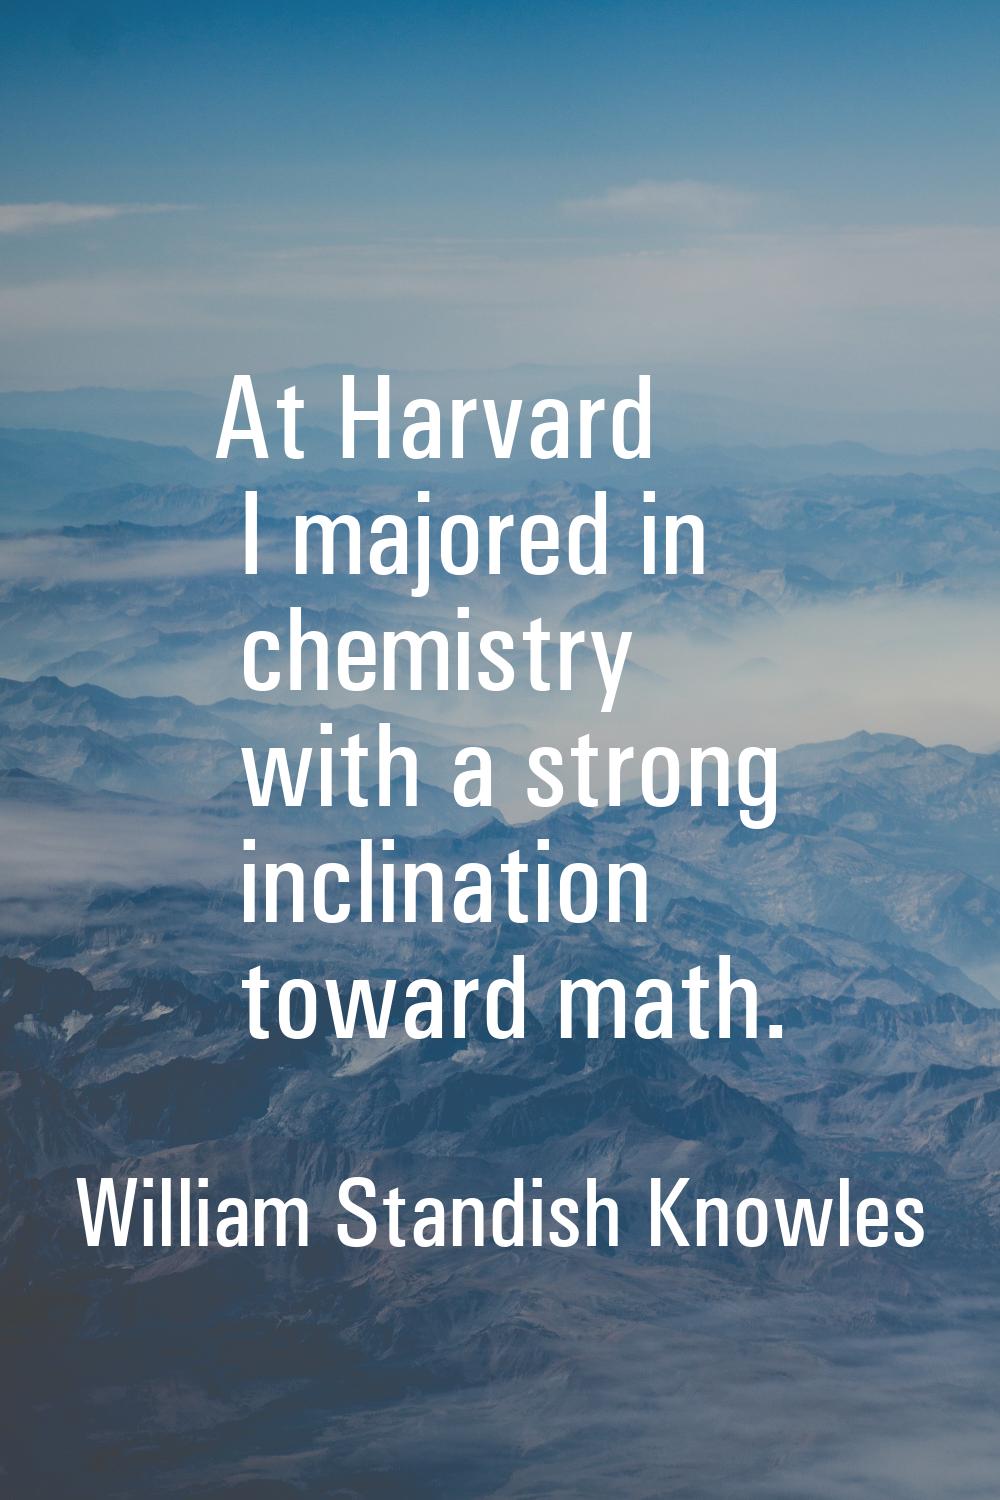 At Harvard I majored in chemistry with a strong inclination toward math.